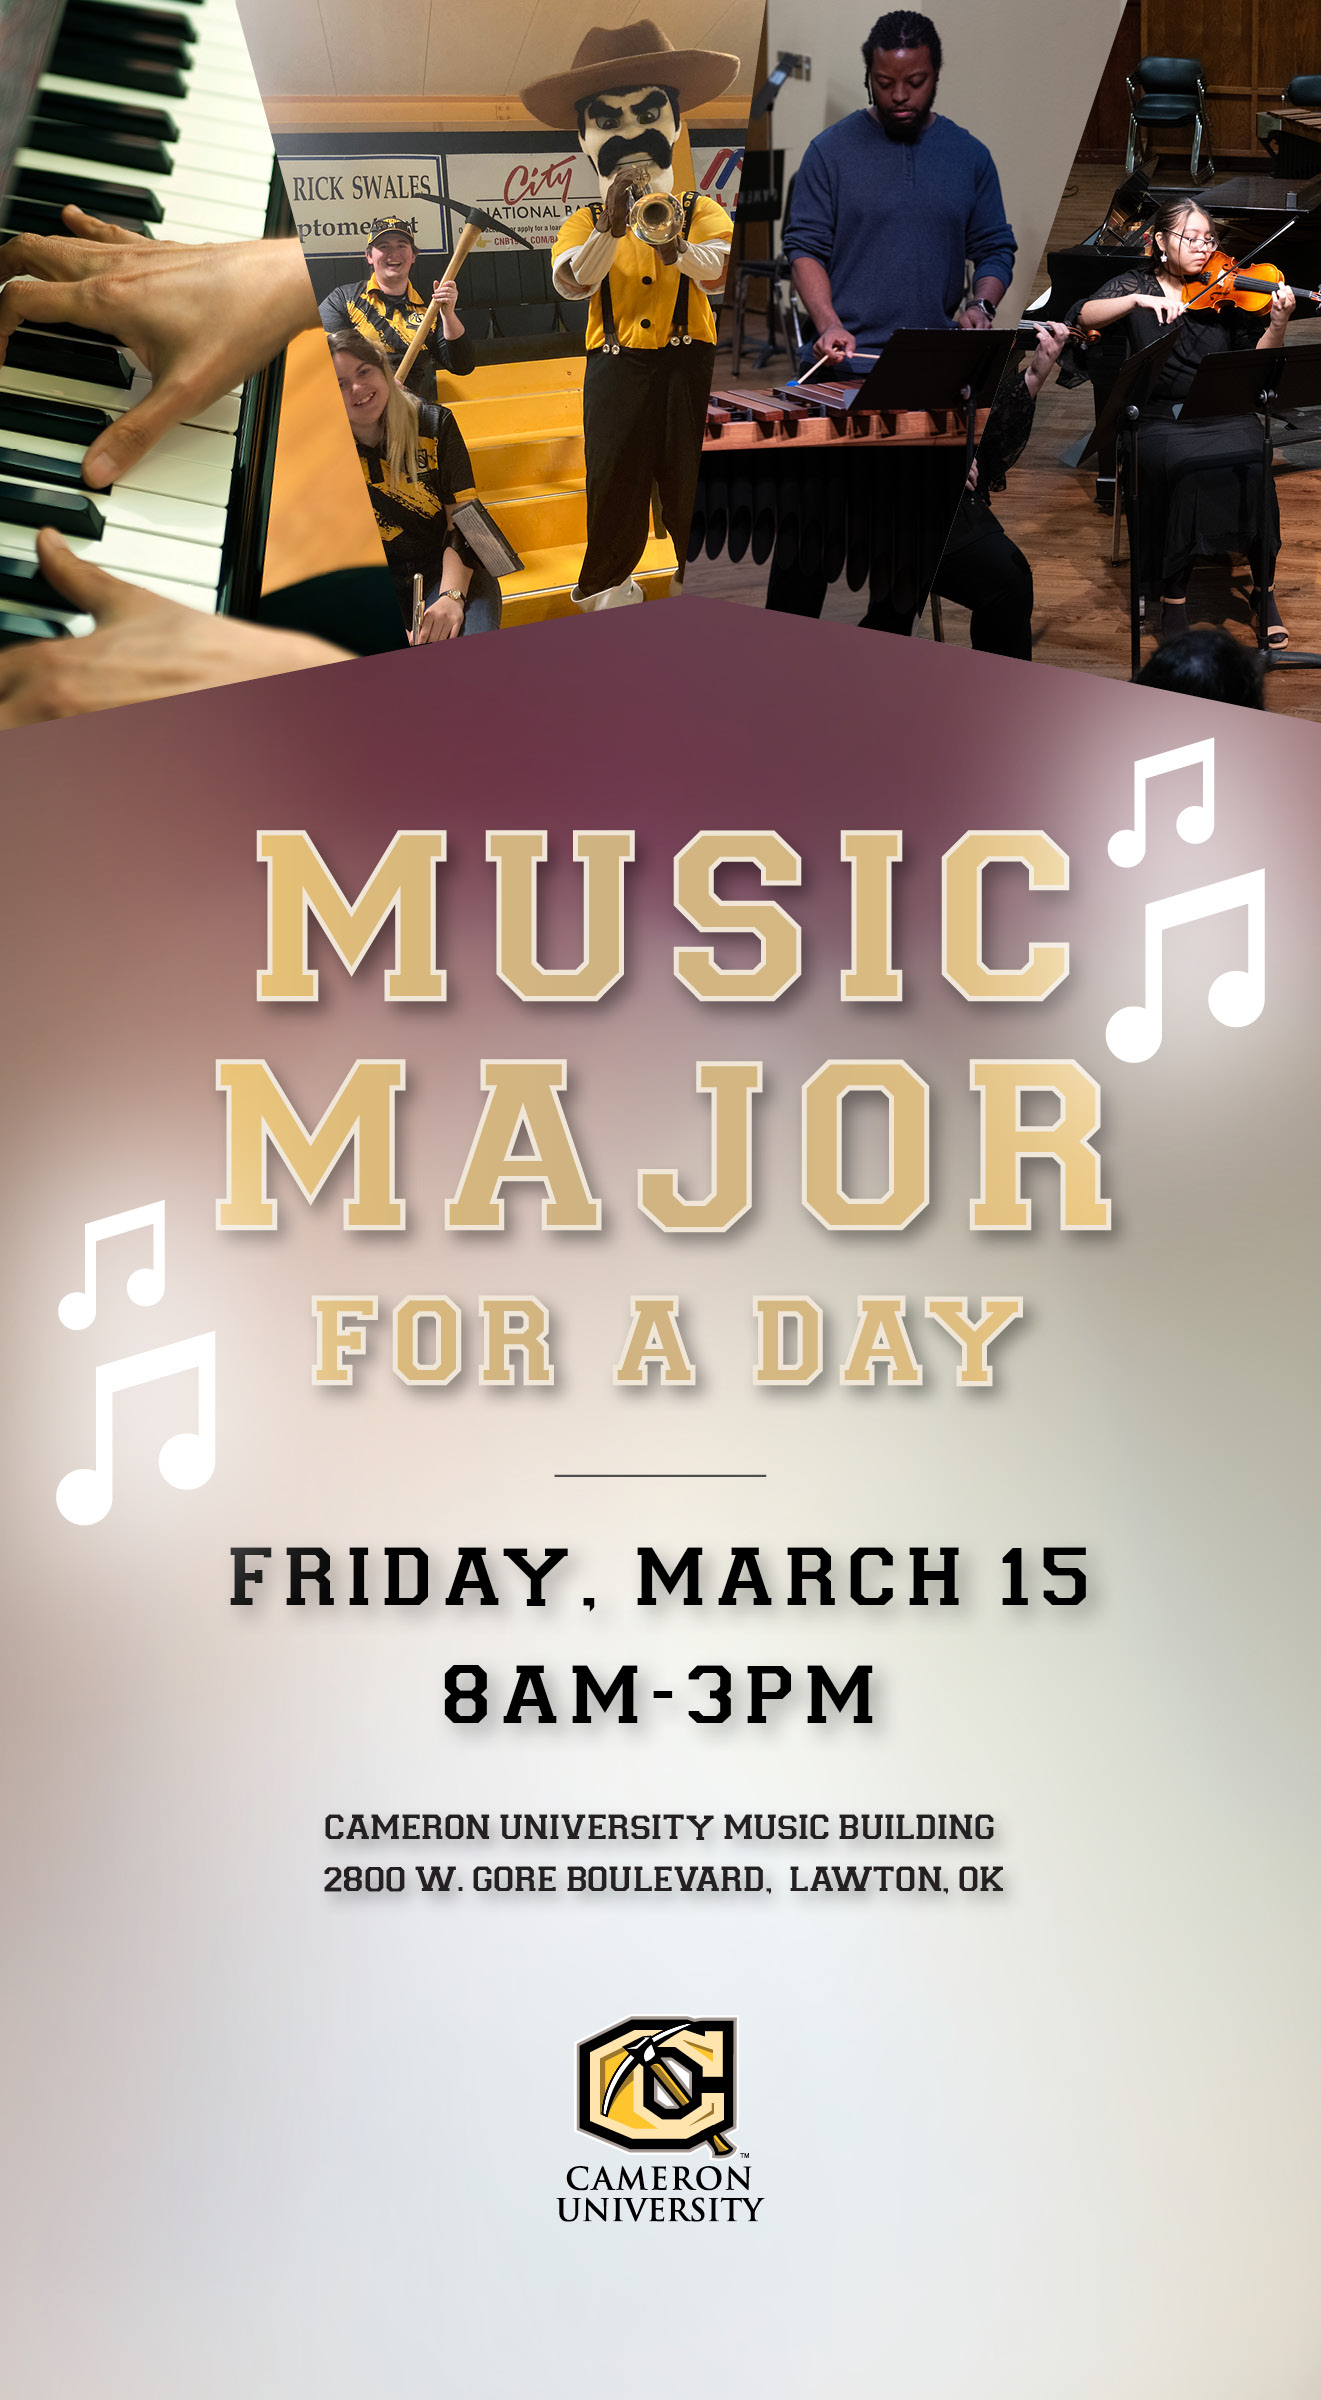 Music Major for a day
Friday, march 15
8 a.m. - 3 p.m.
Cameron University Music Building
2800 W. Gore Blvd Lawton , OK